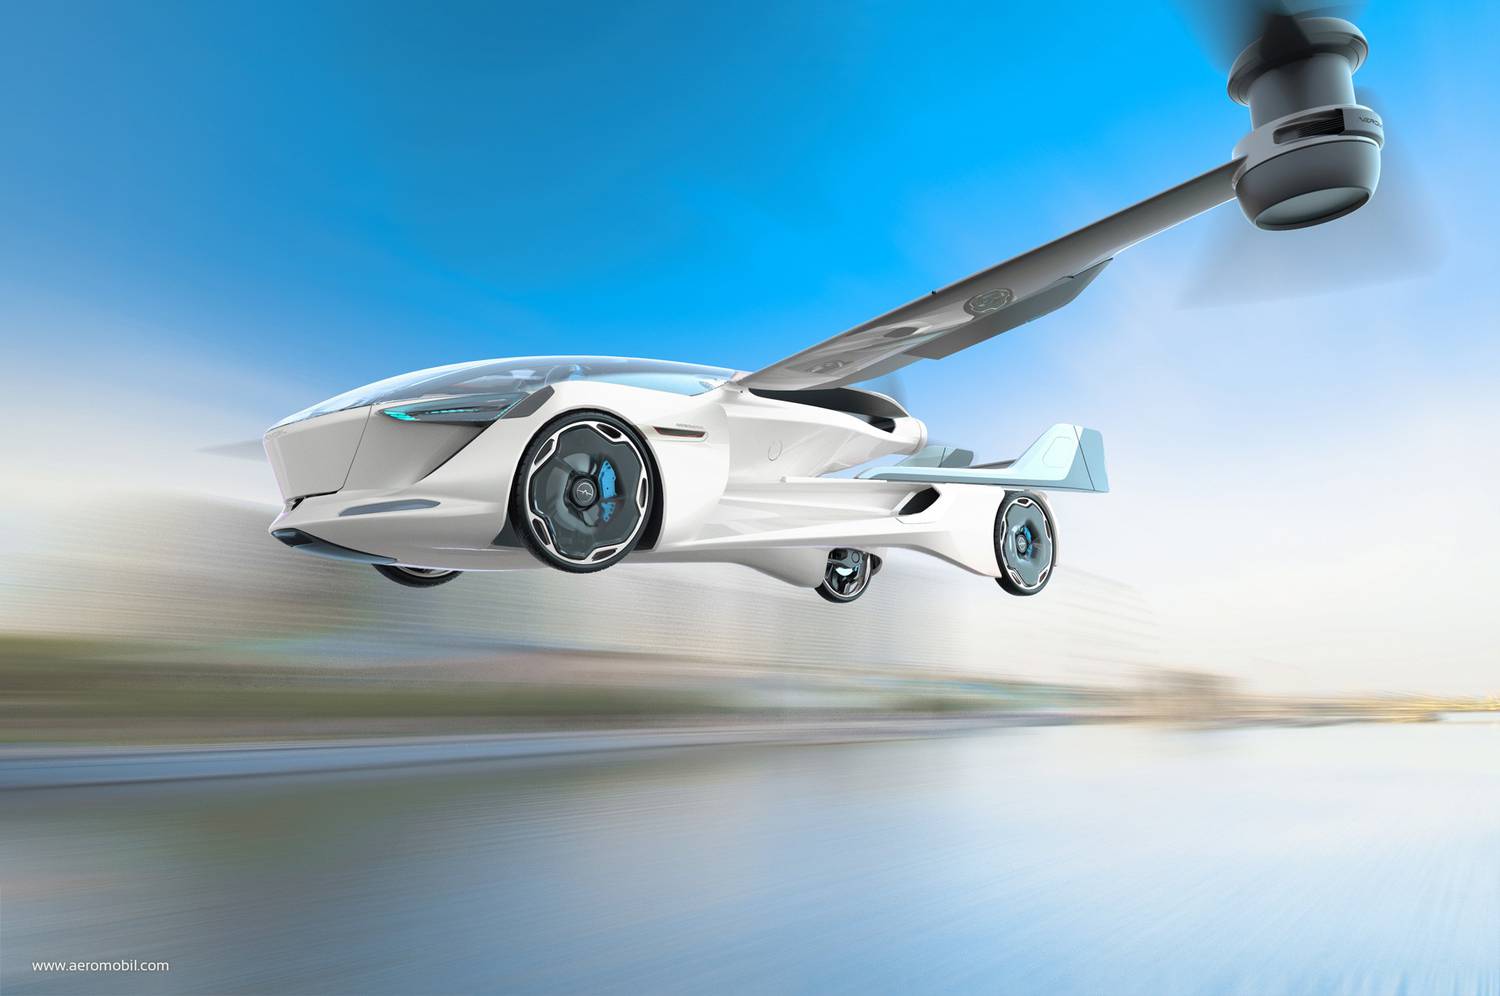 Total Car - Magazine - The new flying car will take off